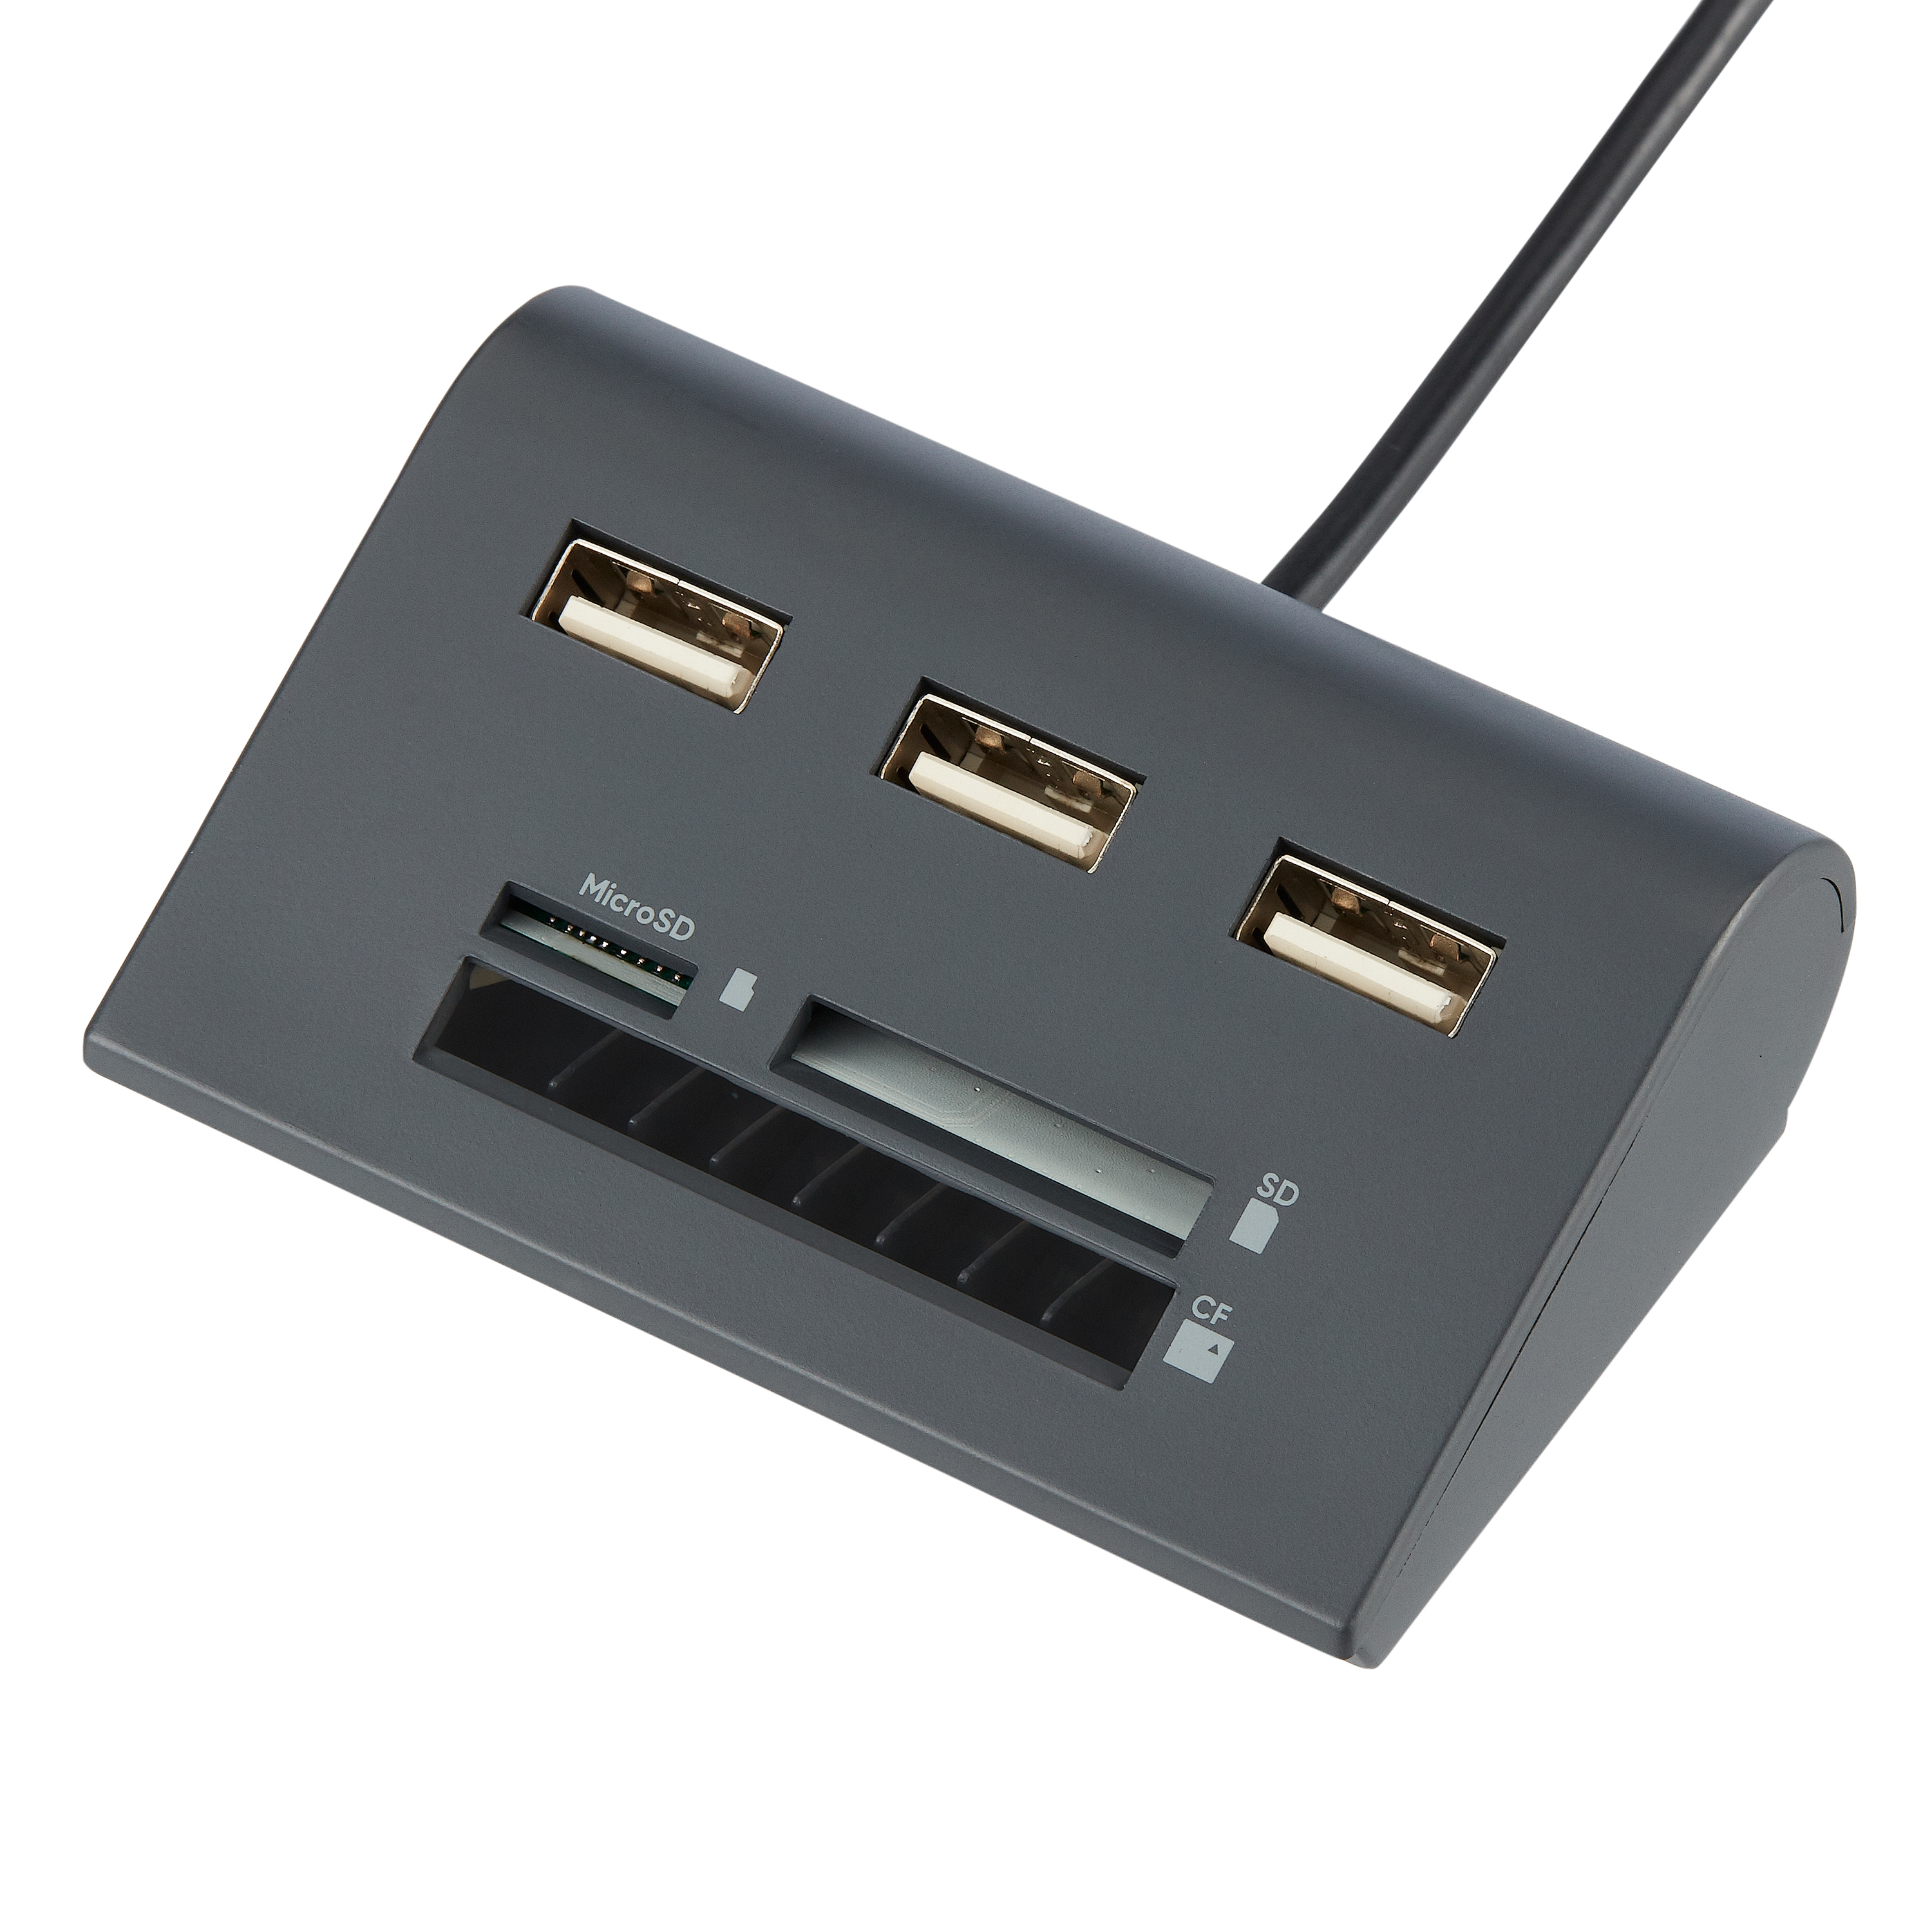 onn. Multi-Port USB Hub with SD, Micro SD and Compact Flash Card Reader - image 1 of 5